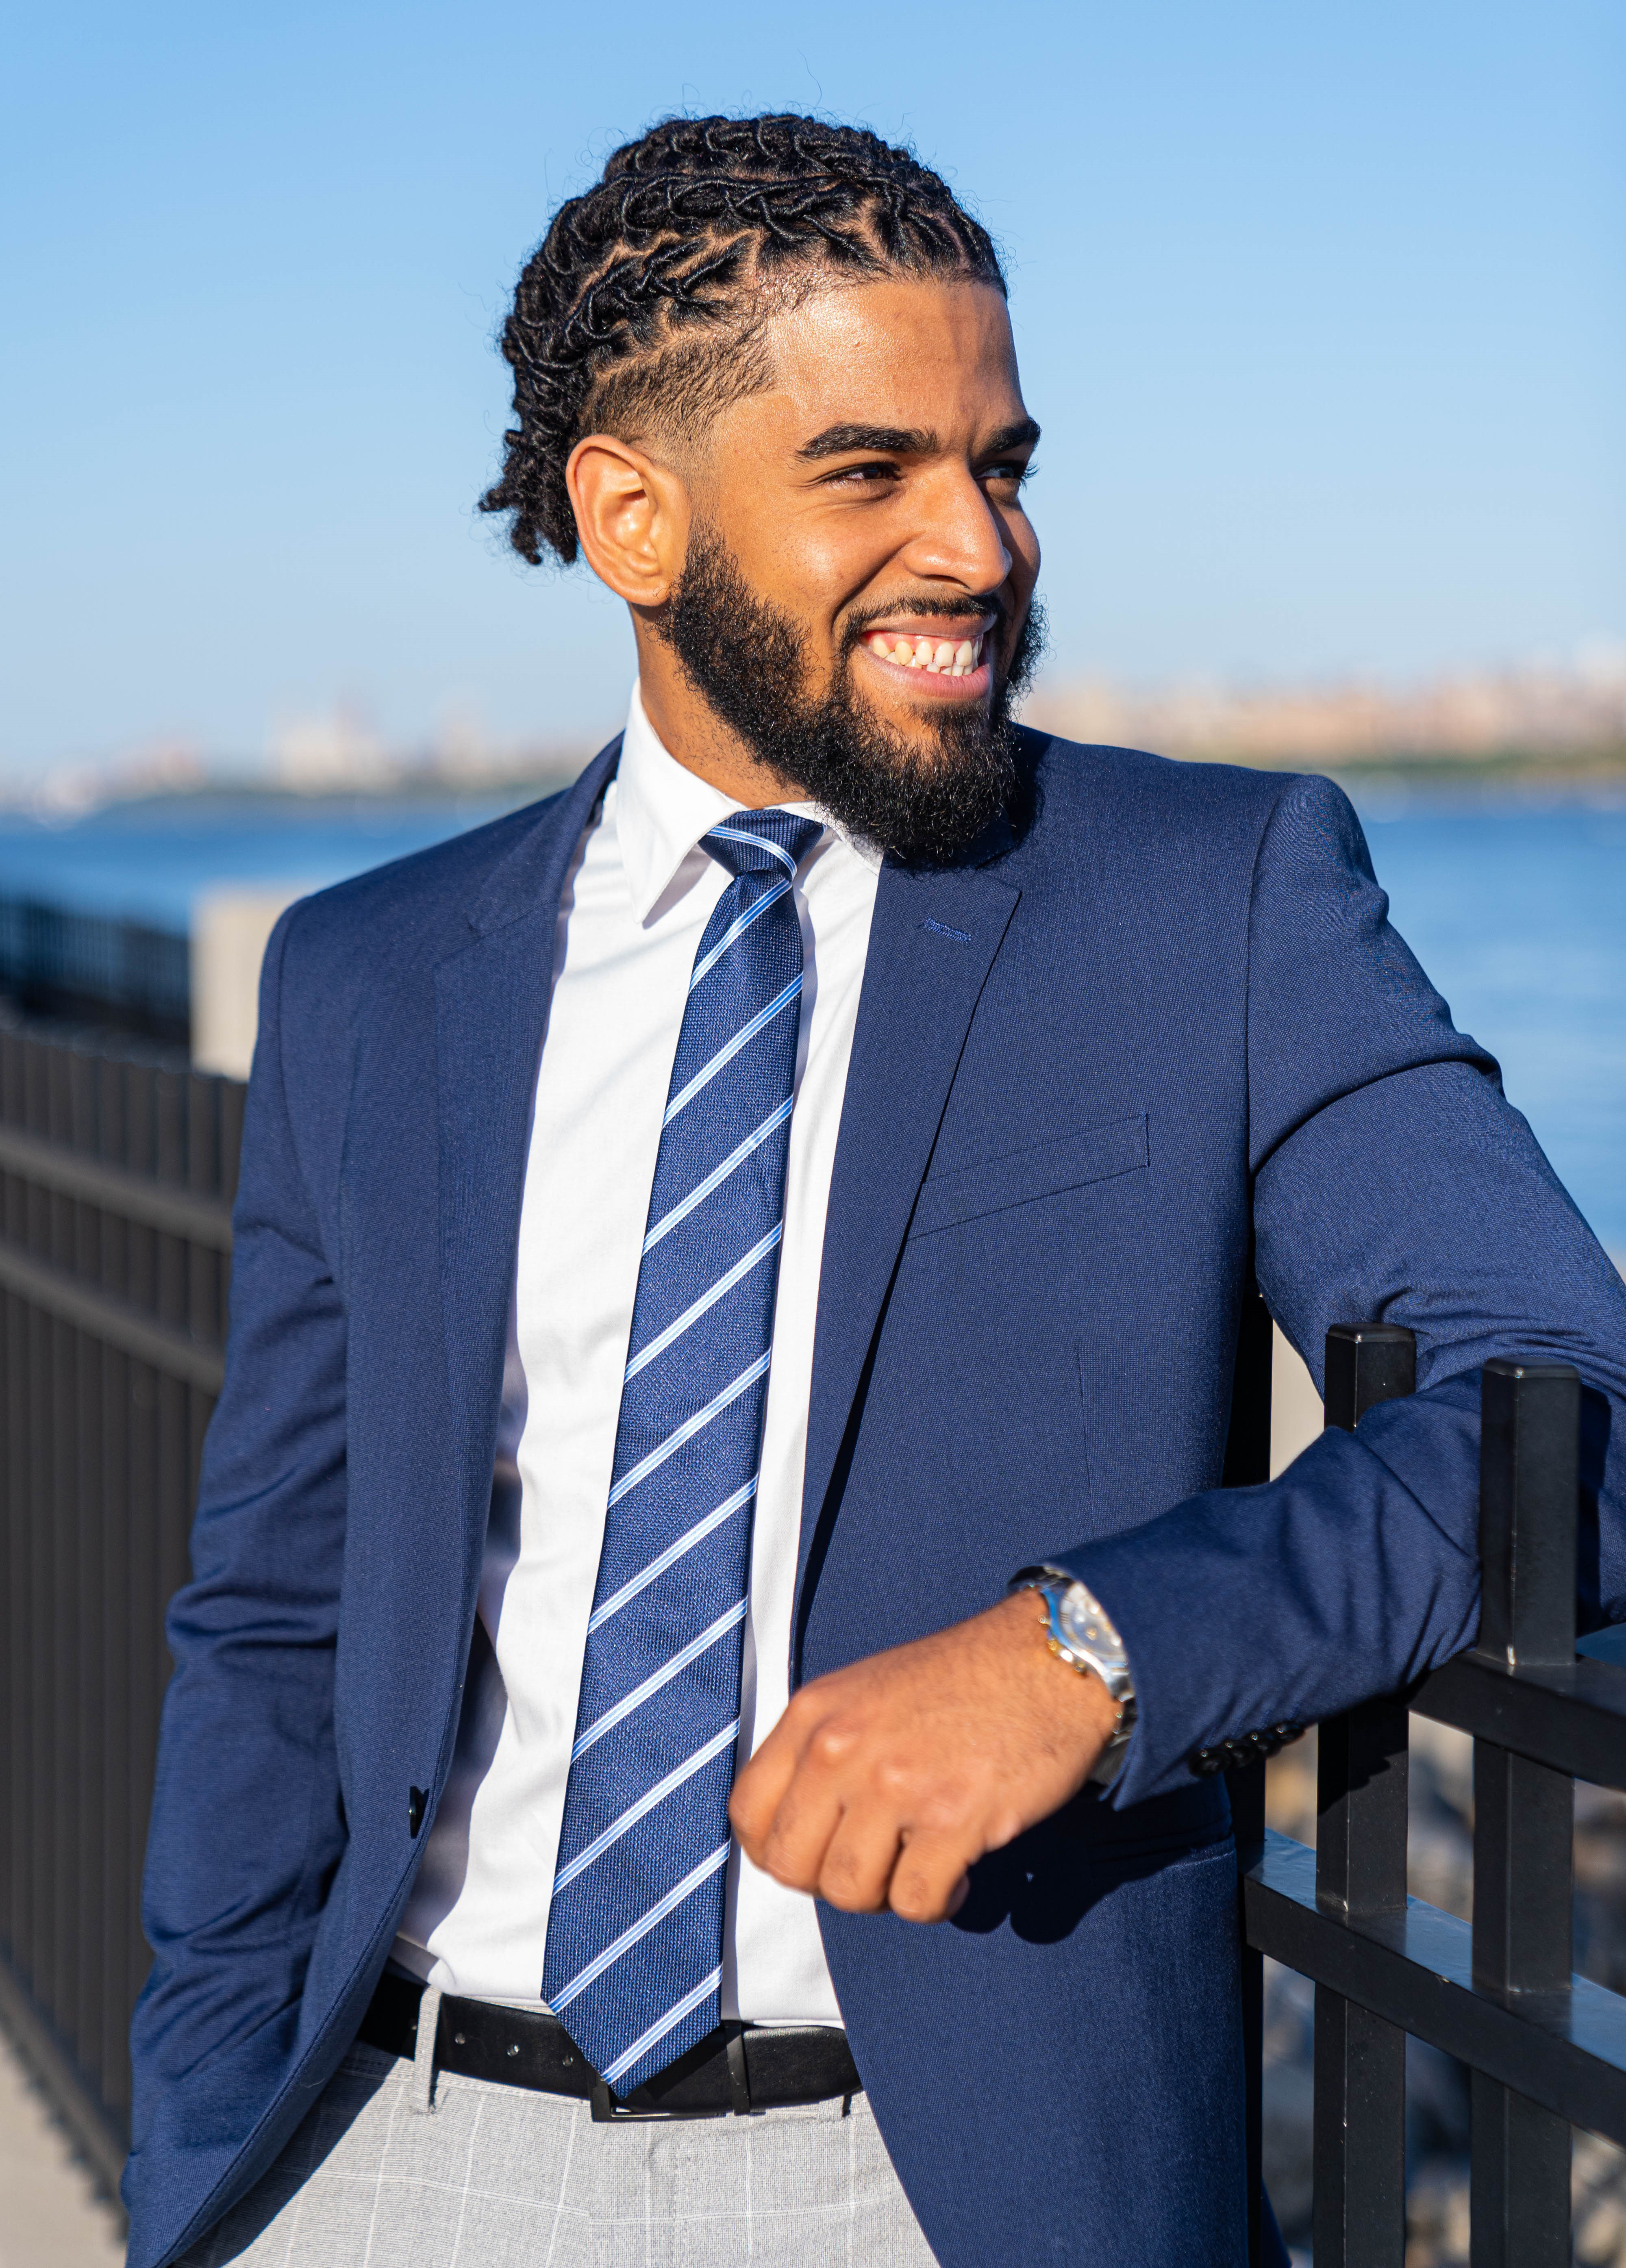 A Dominican man dressed in khakis, a blue blazer, white shirt and blue striped tie stands smiling while looking off to a body of water